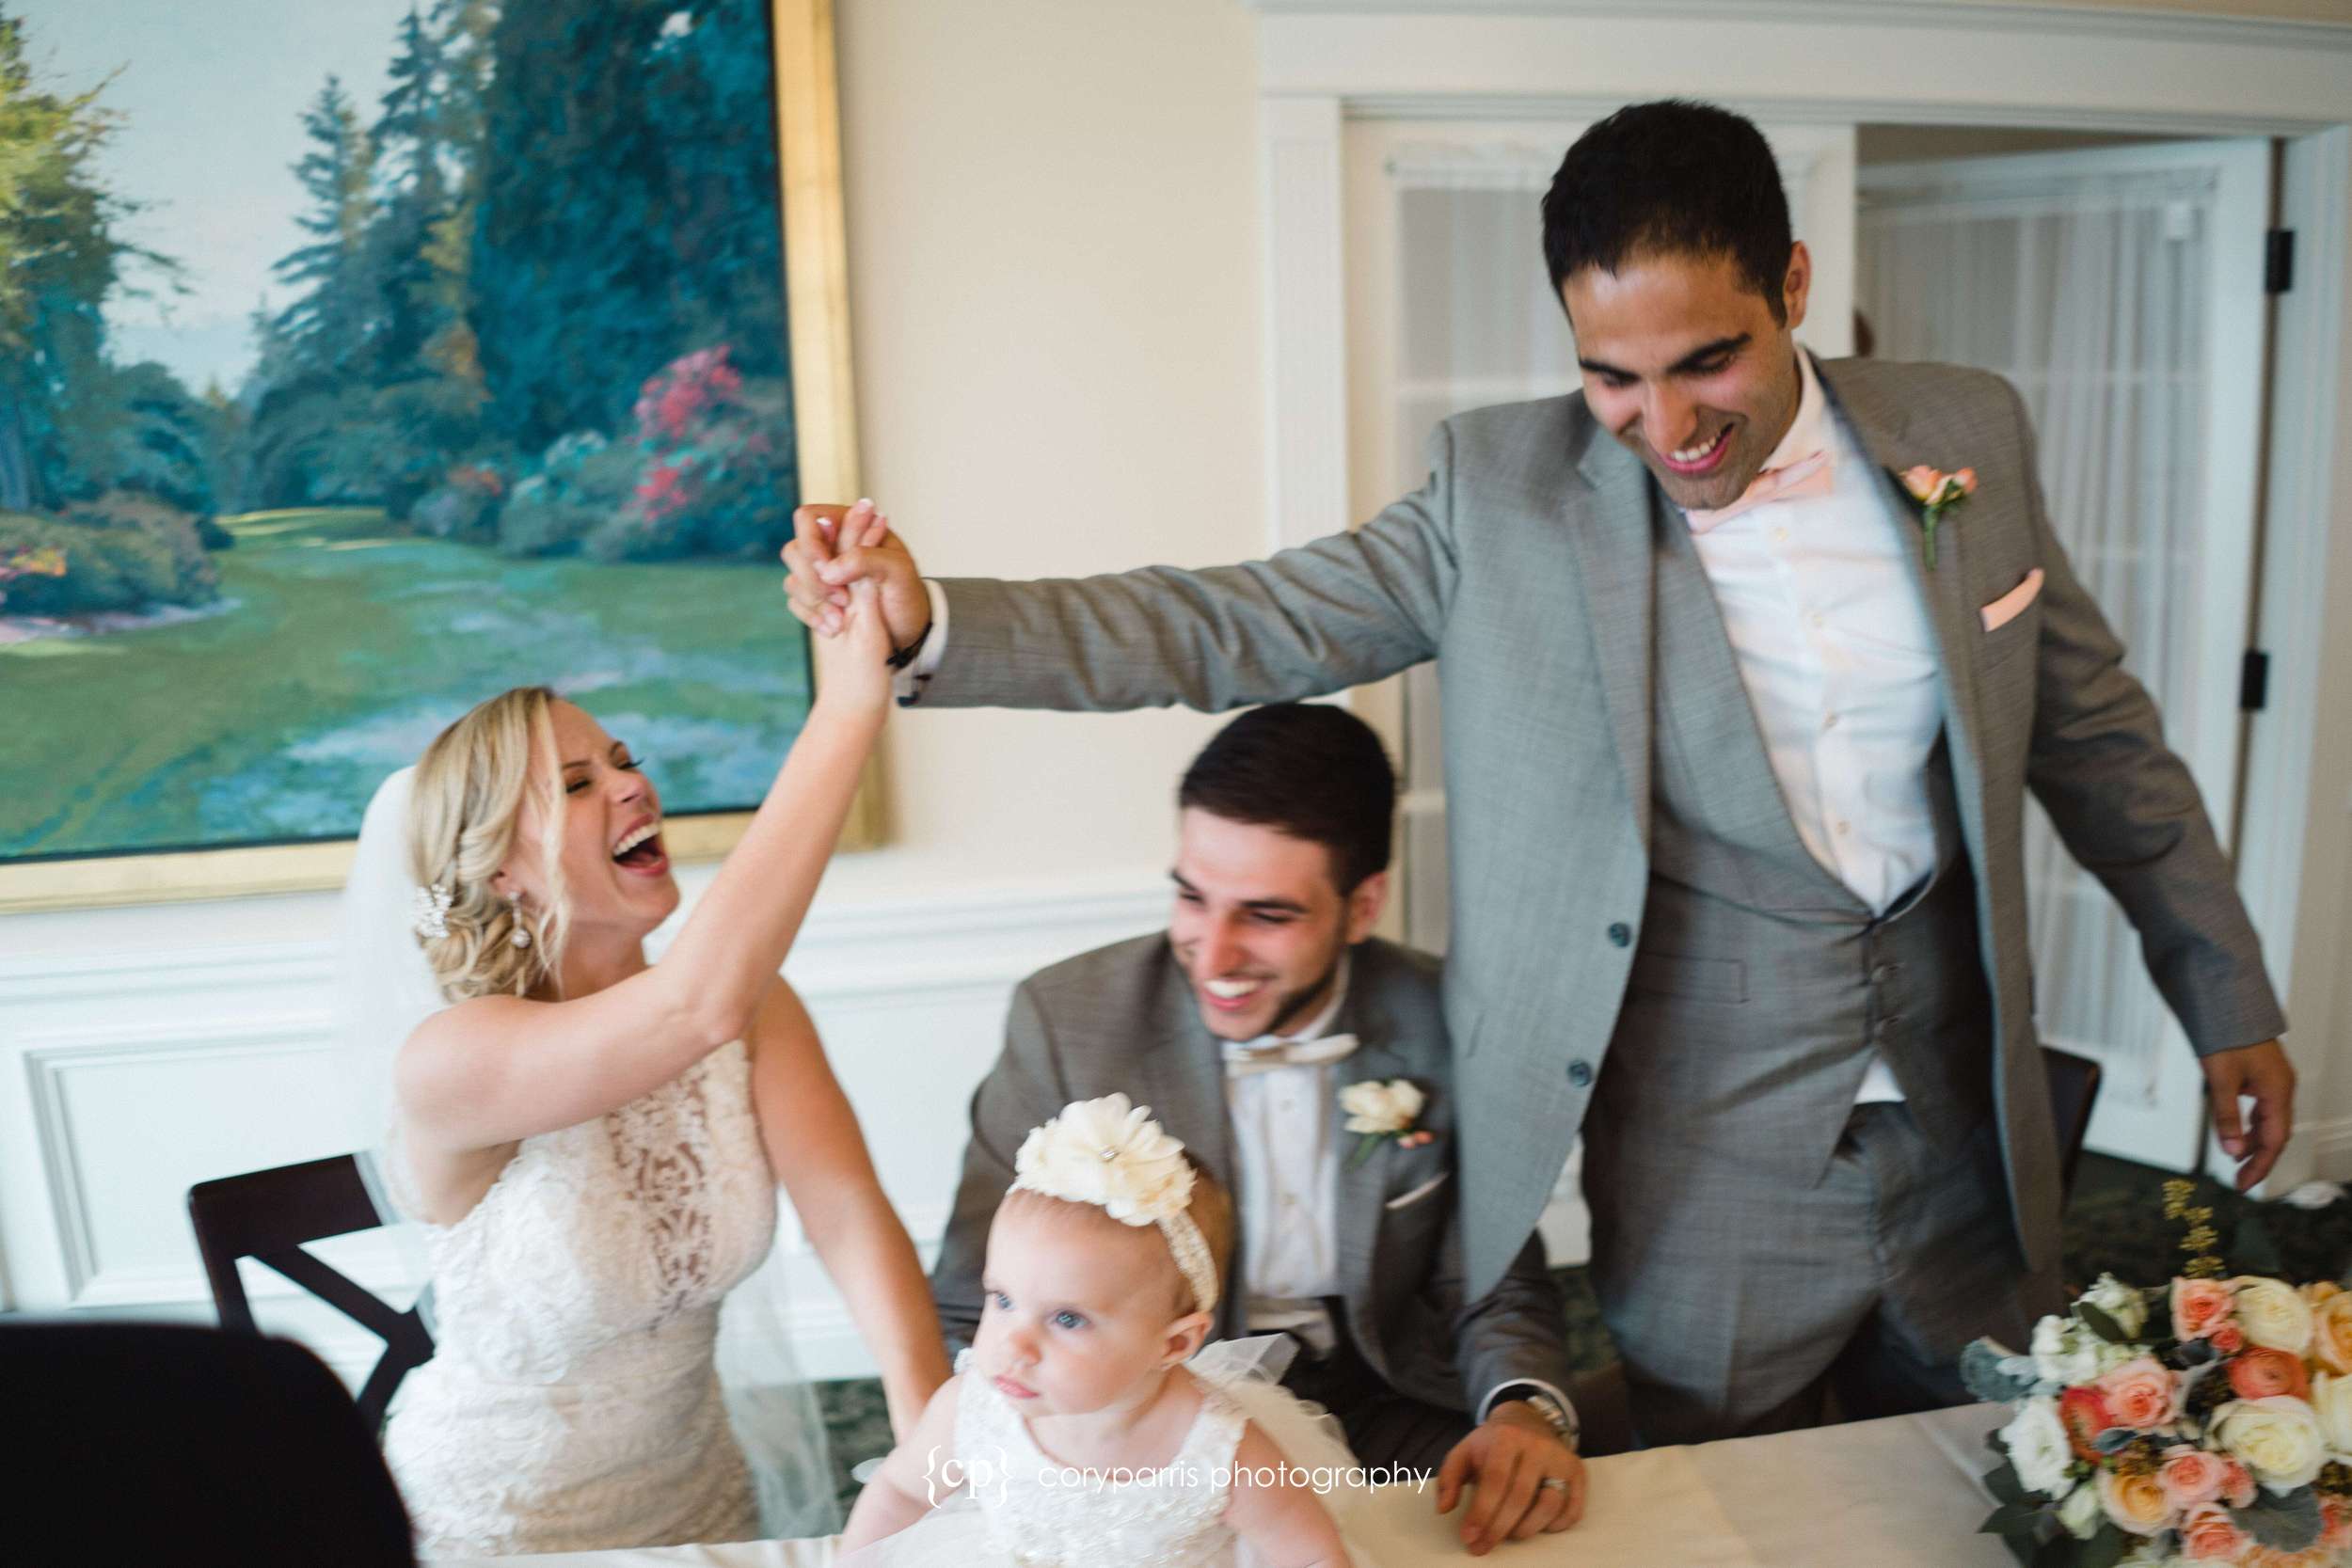 High five for the new brother-in-law